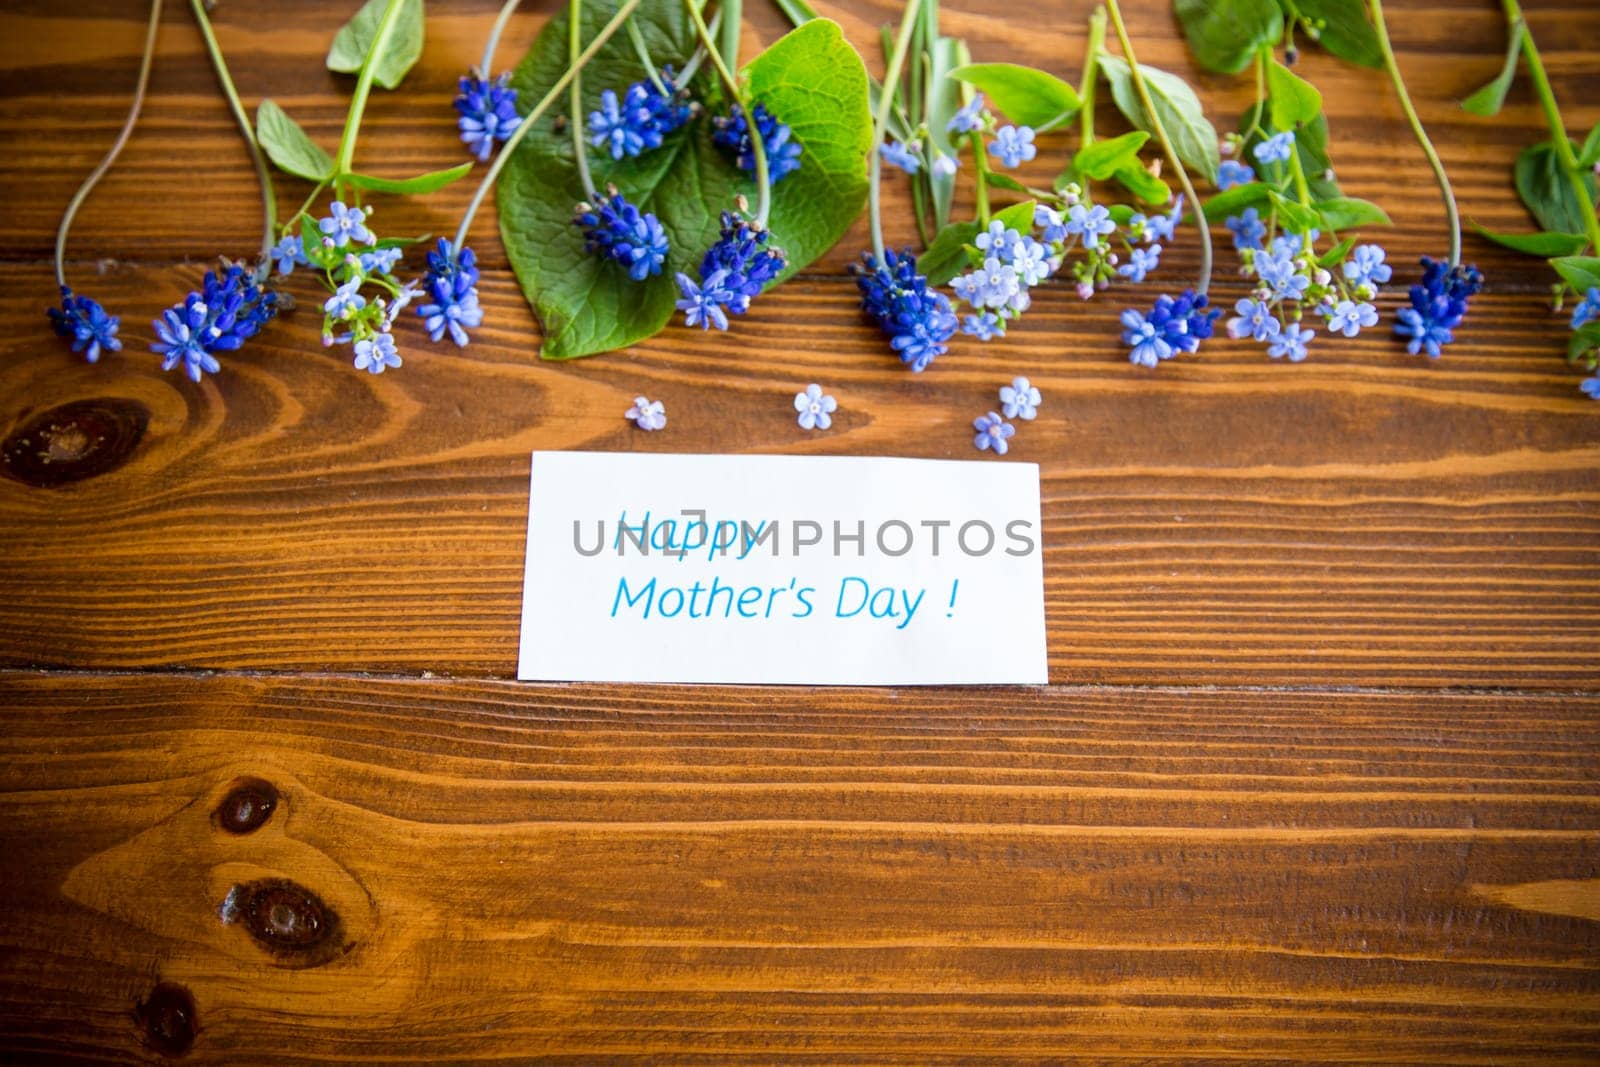 Wooden background with spring flowers and empty space for text.